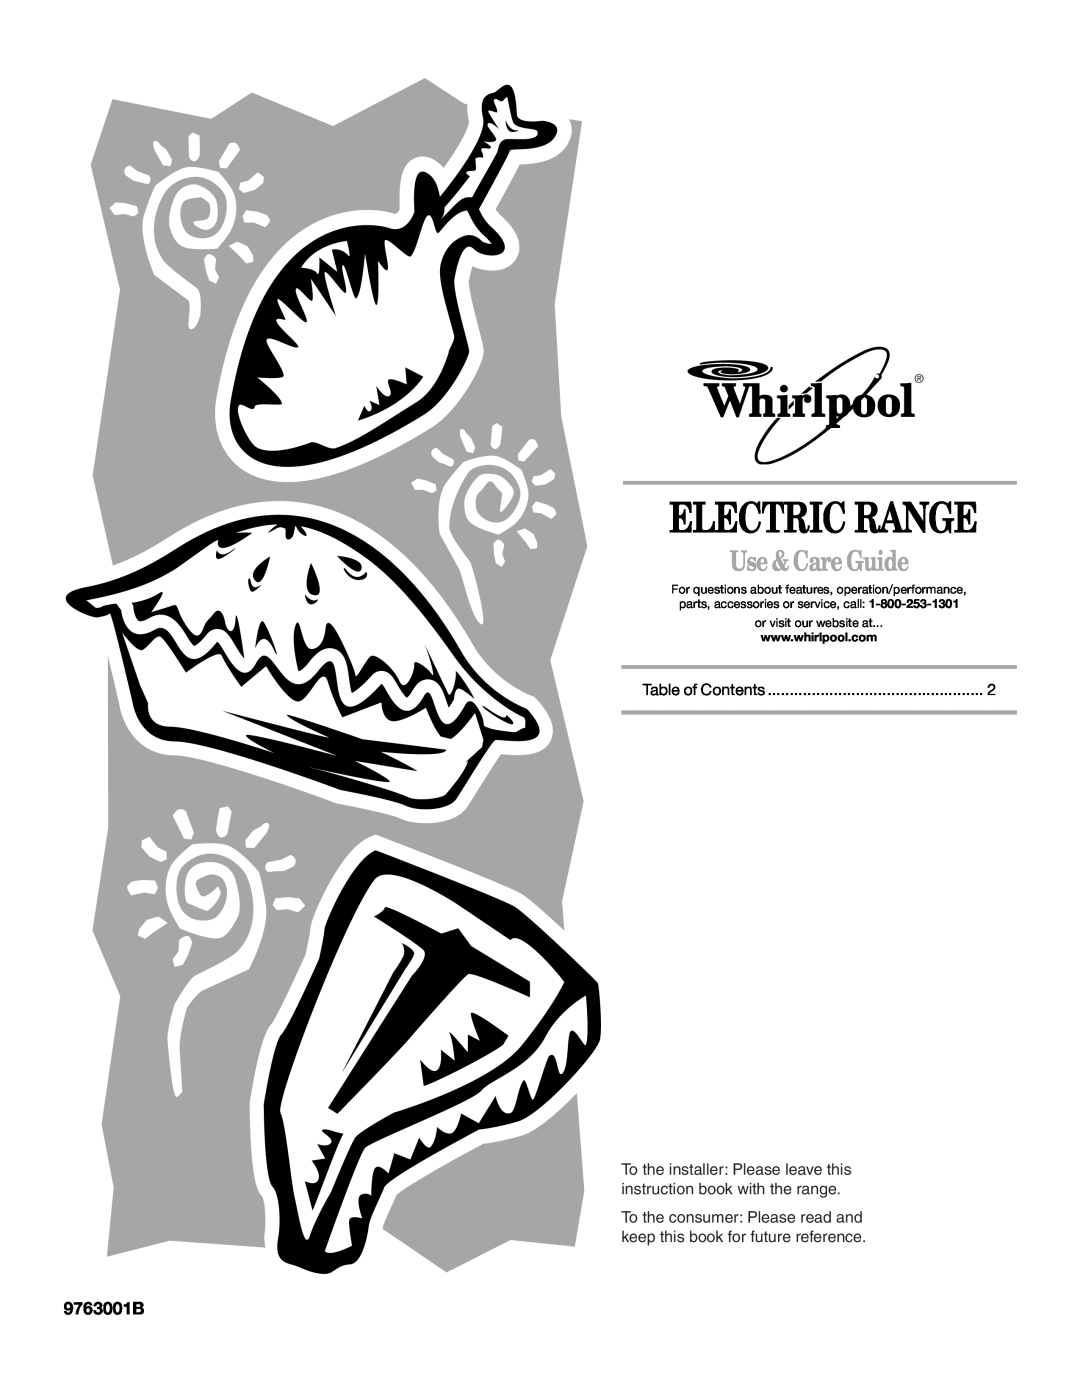 Whirlpool GR563LXSB0 manual 9763001B, Electric Range, Use & Care Guide, or visit our website at 